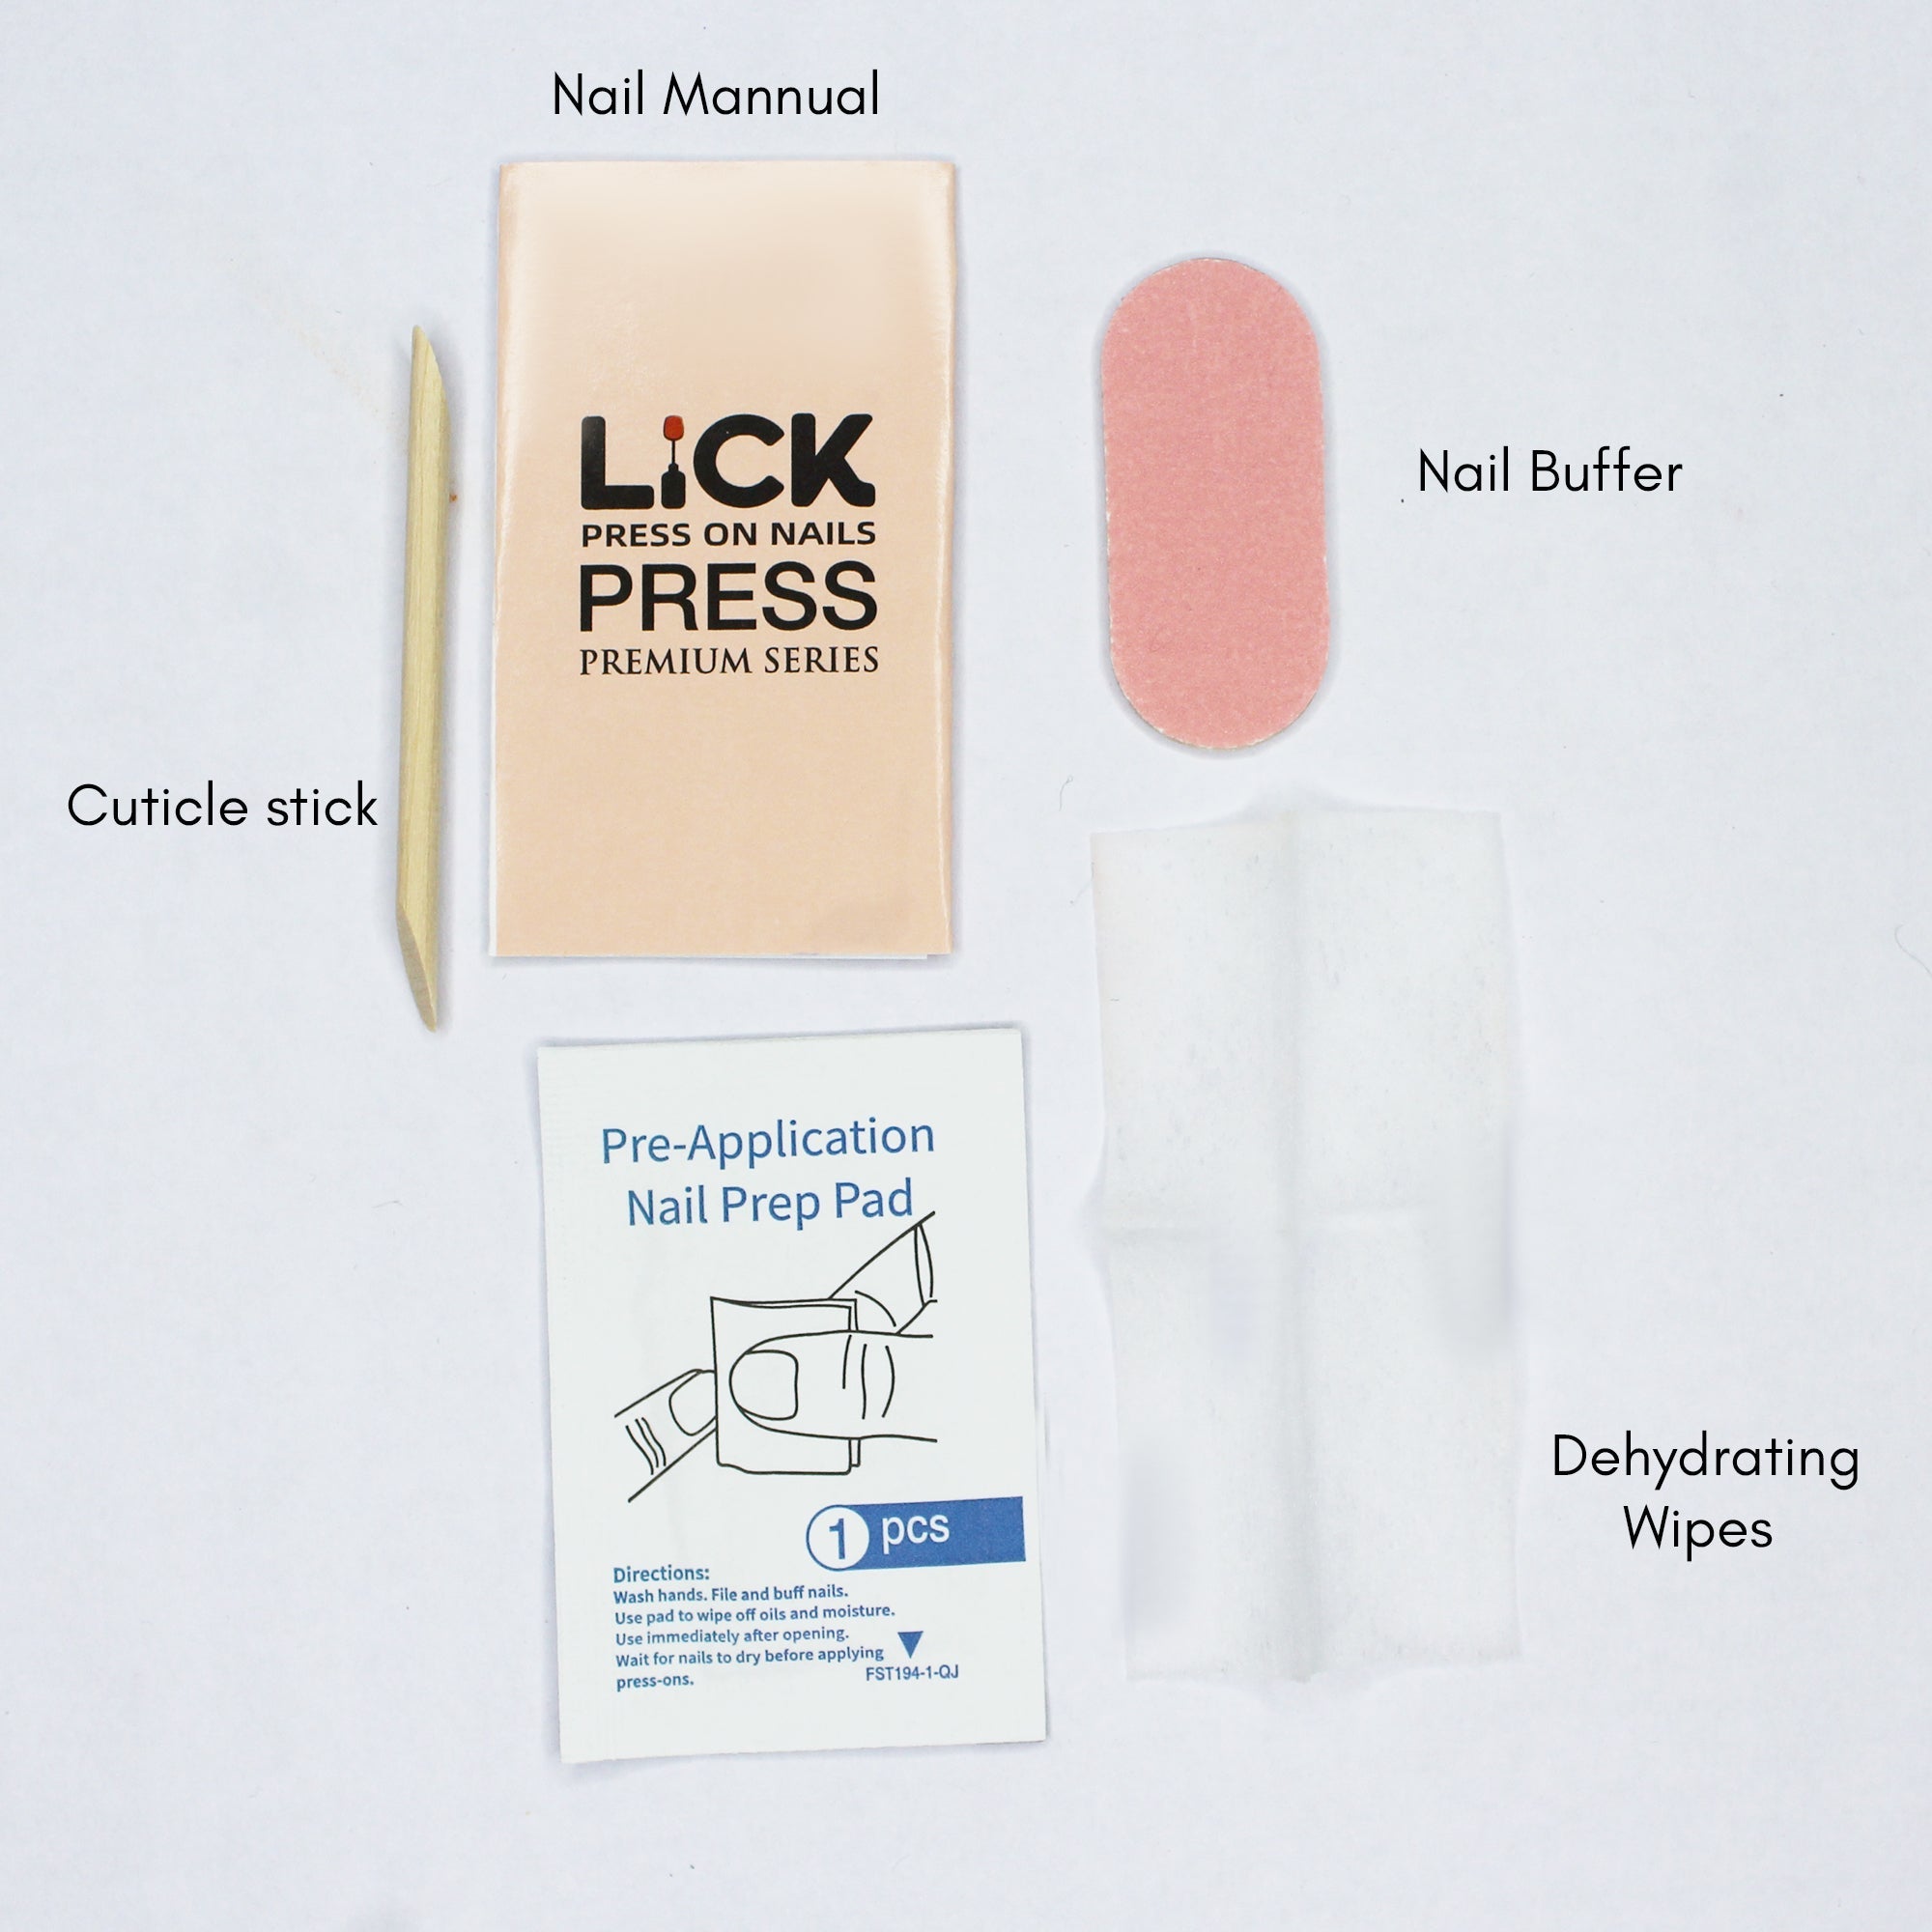 Lick Nail Glossy Finish Nude Beige Square Shape Press On Nails Pack Of 30 Pcs